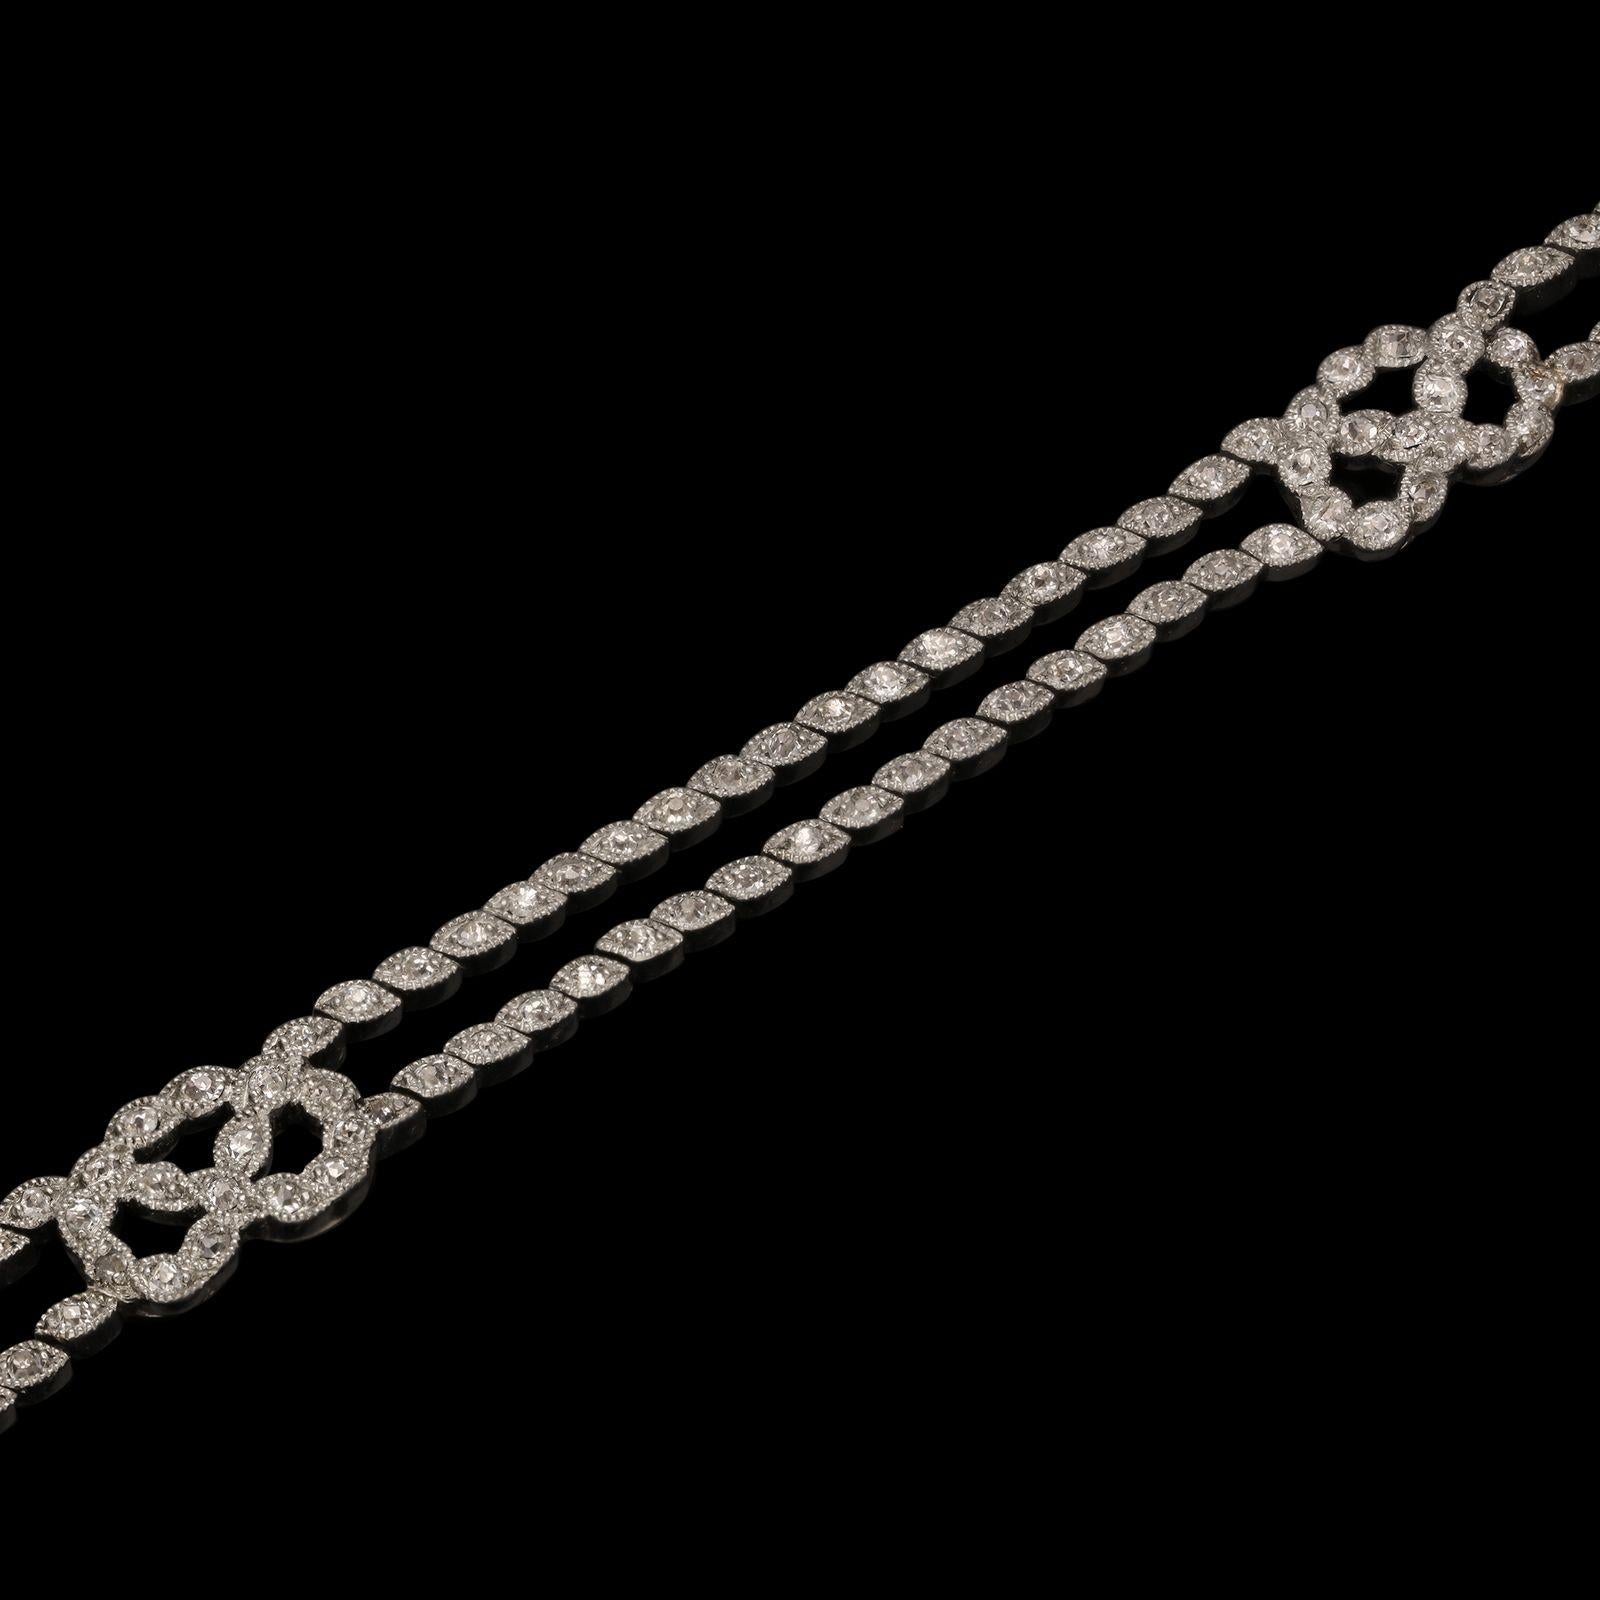 A beautiful Belle Epoque diamond and platinum bracelet c.1910, the bracelet formed of two rows of old cut diamonds set in platinum marquise shaped collets with millegrain edging positioned diagonally giving the impression of a twisted chord and with